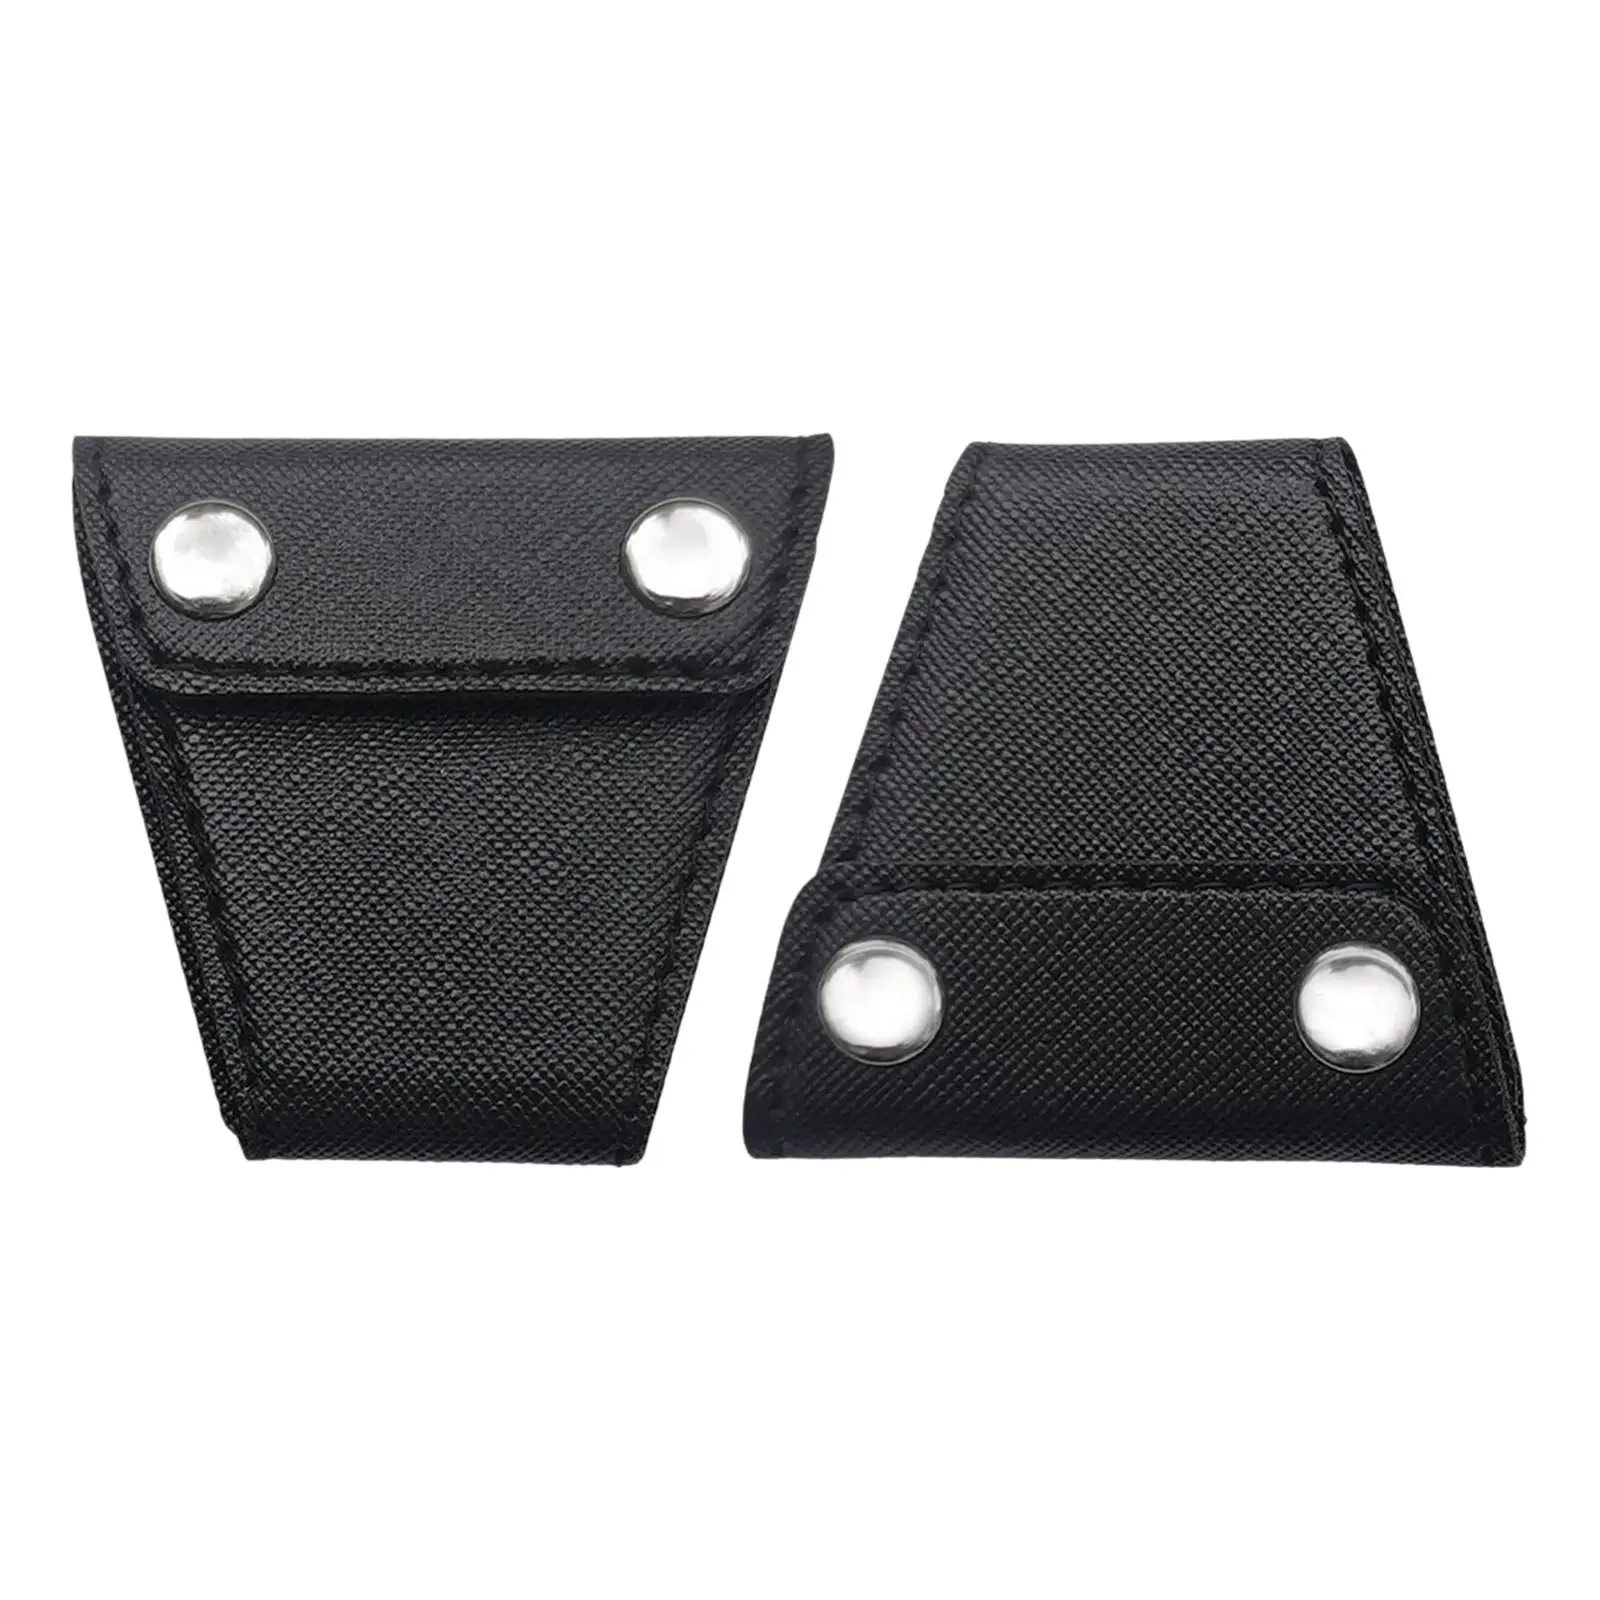 2x seat Adjuster Comfort Universal Protective Safety Strap Adjuster Pad Protects from Cut Your Neck or Rubbing Your Chest